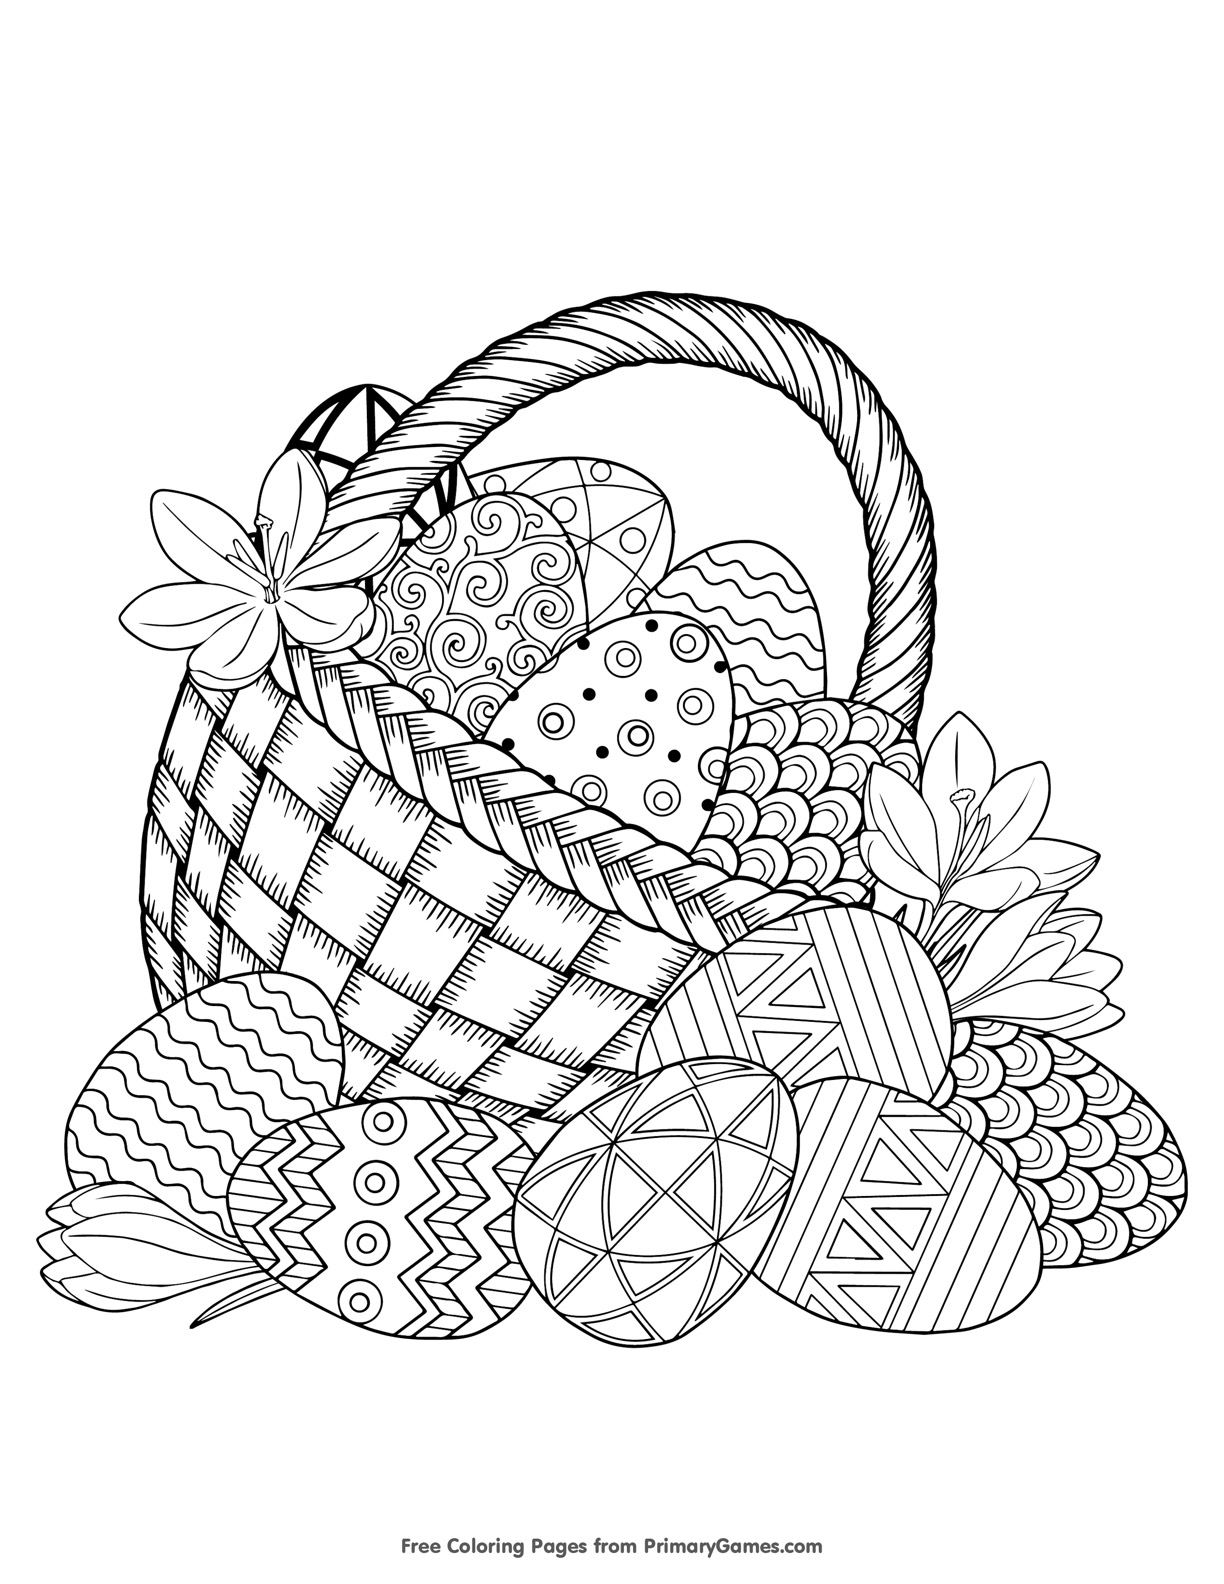 Laundry Basket coloring page  Free Printable Coloring Pages